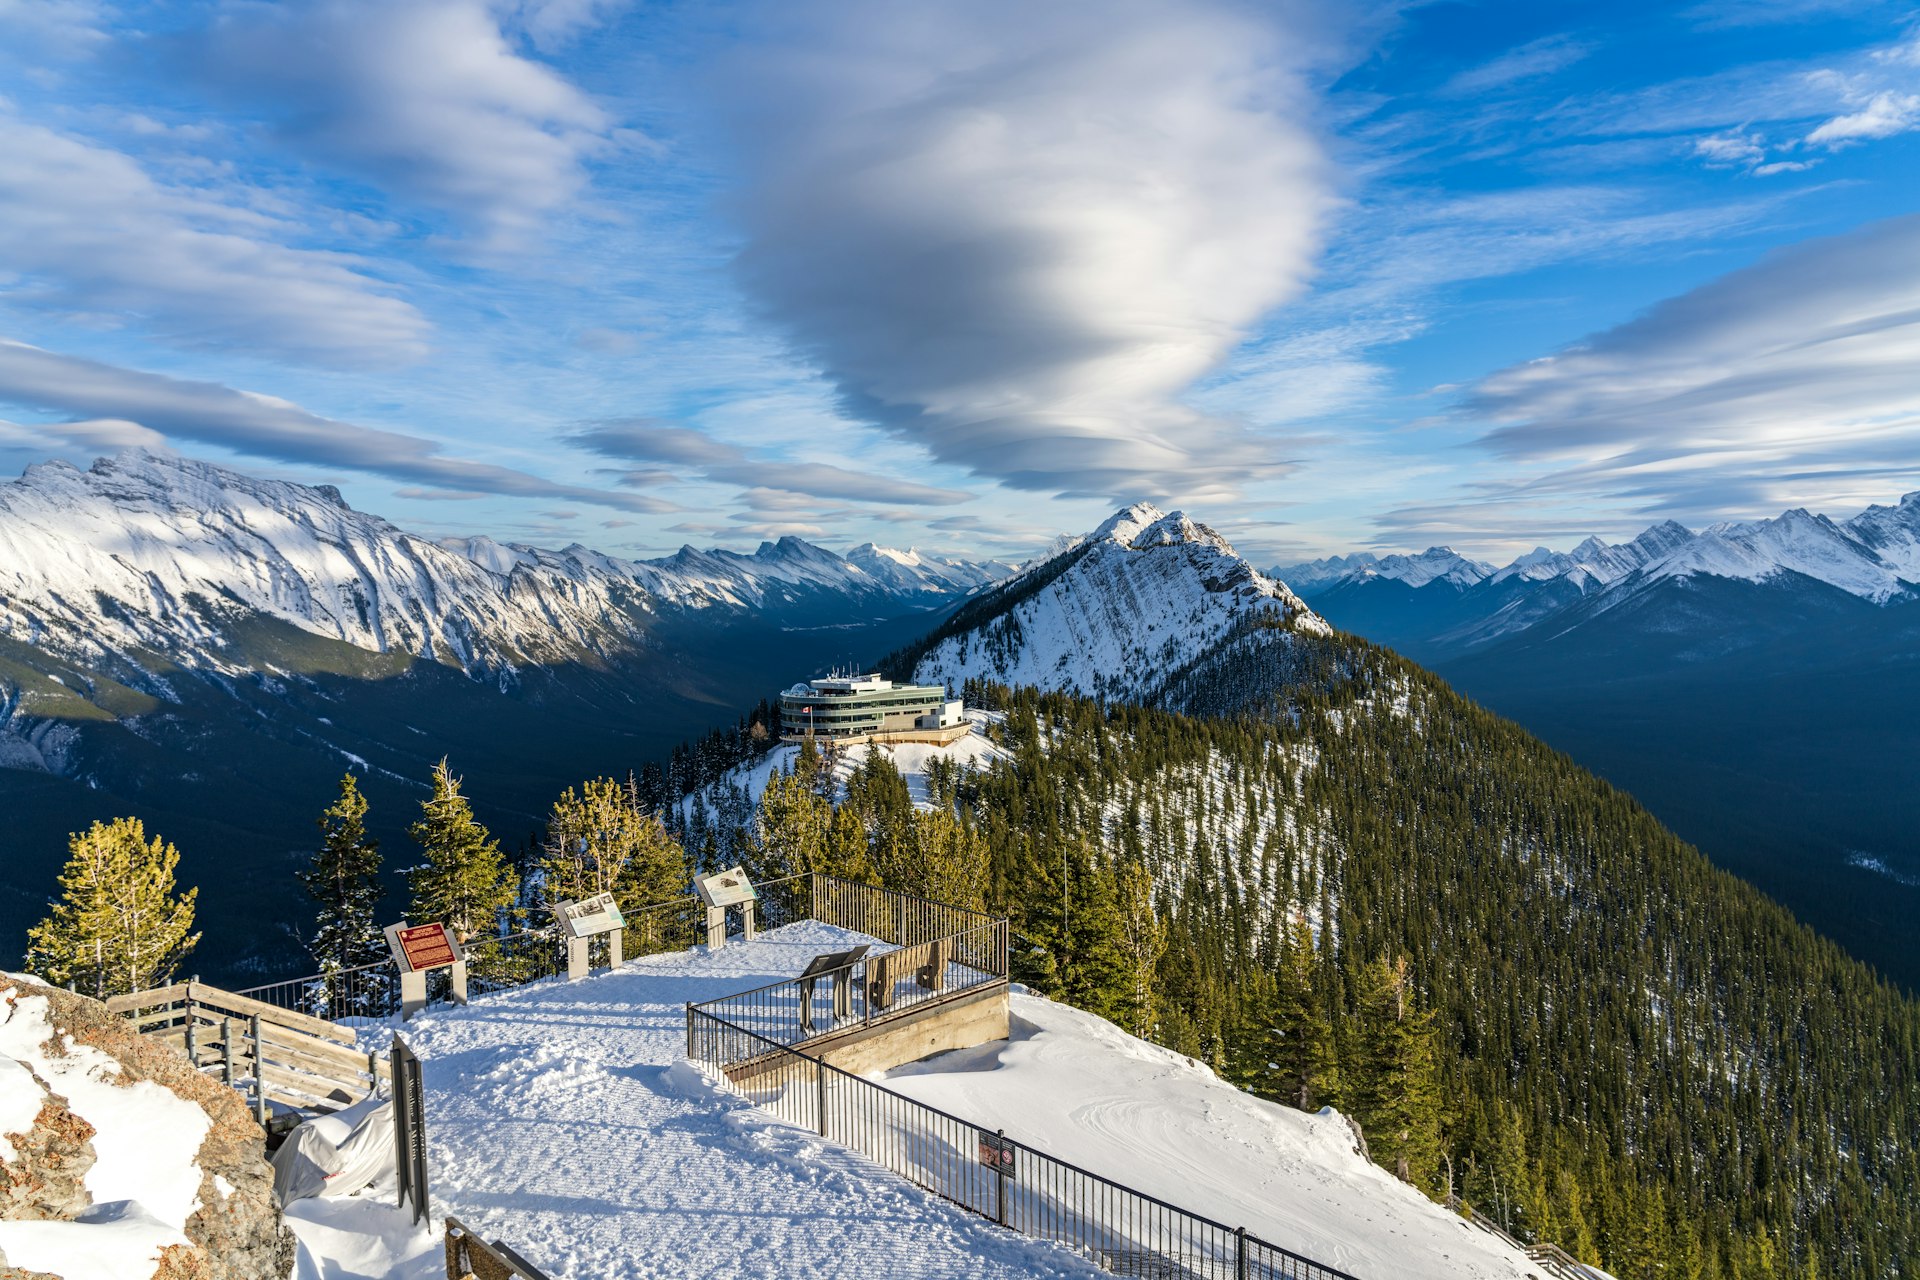 Wooden stairs and boardwalks are covered with snow; the viewing platform overlooks Banff Gondola Station